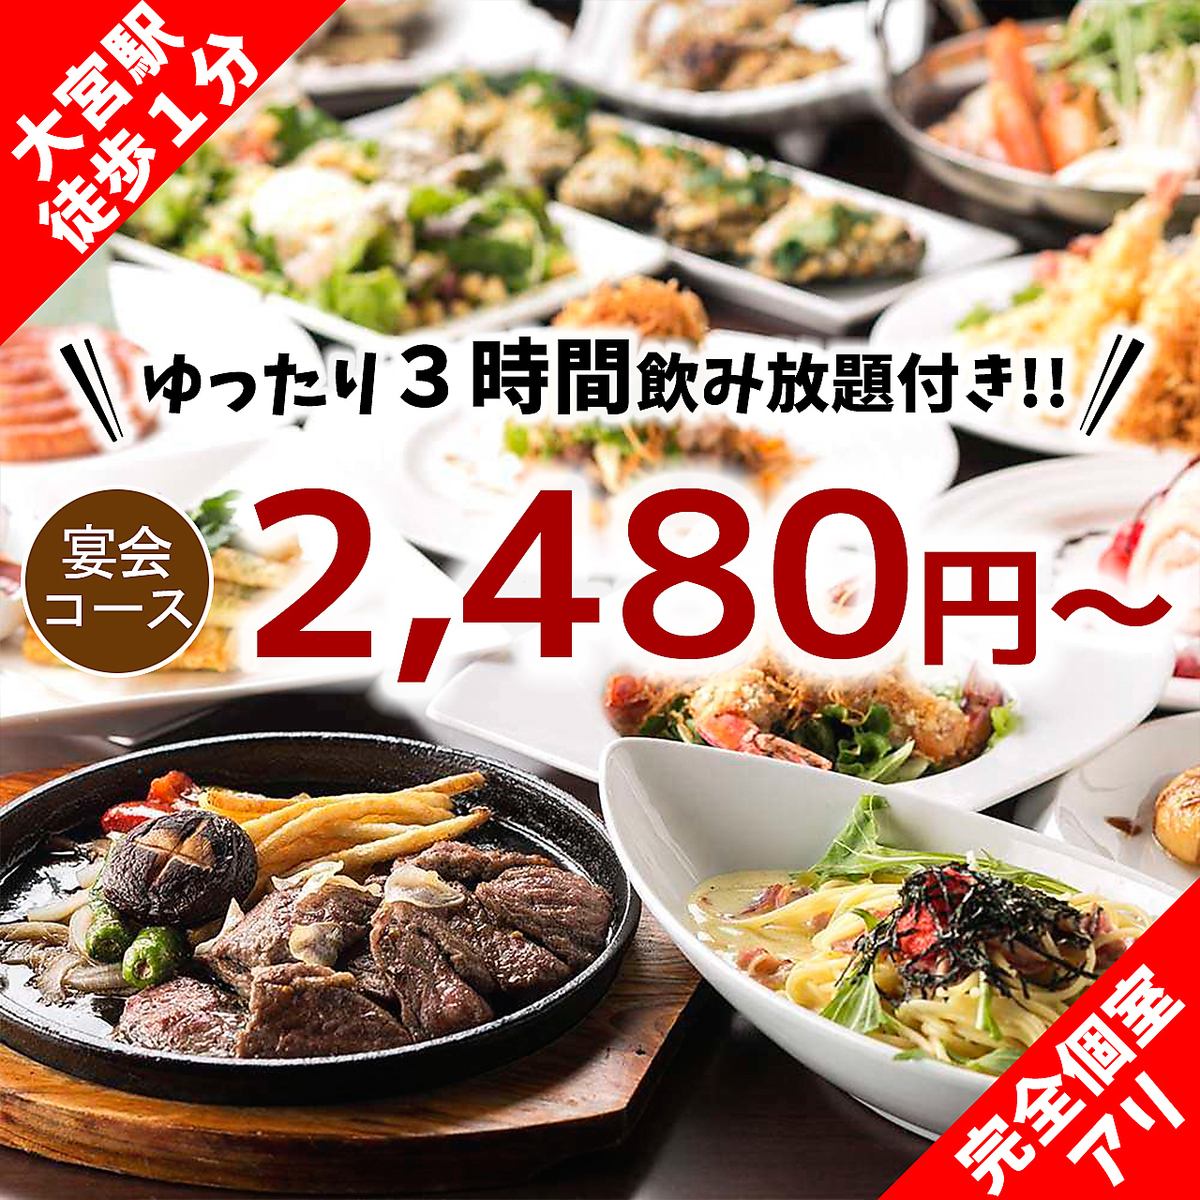 [Omiya lowest price] Up to 3 hours all-you-can-drink banquet from 2,480 yen ♪